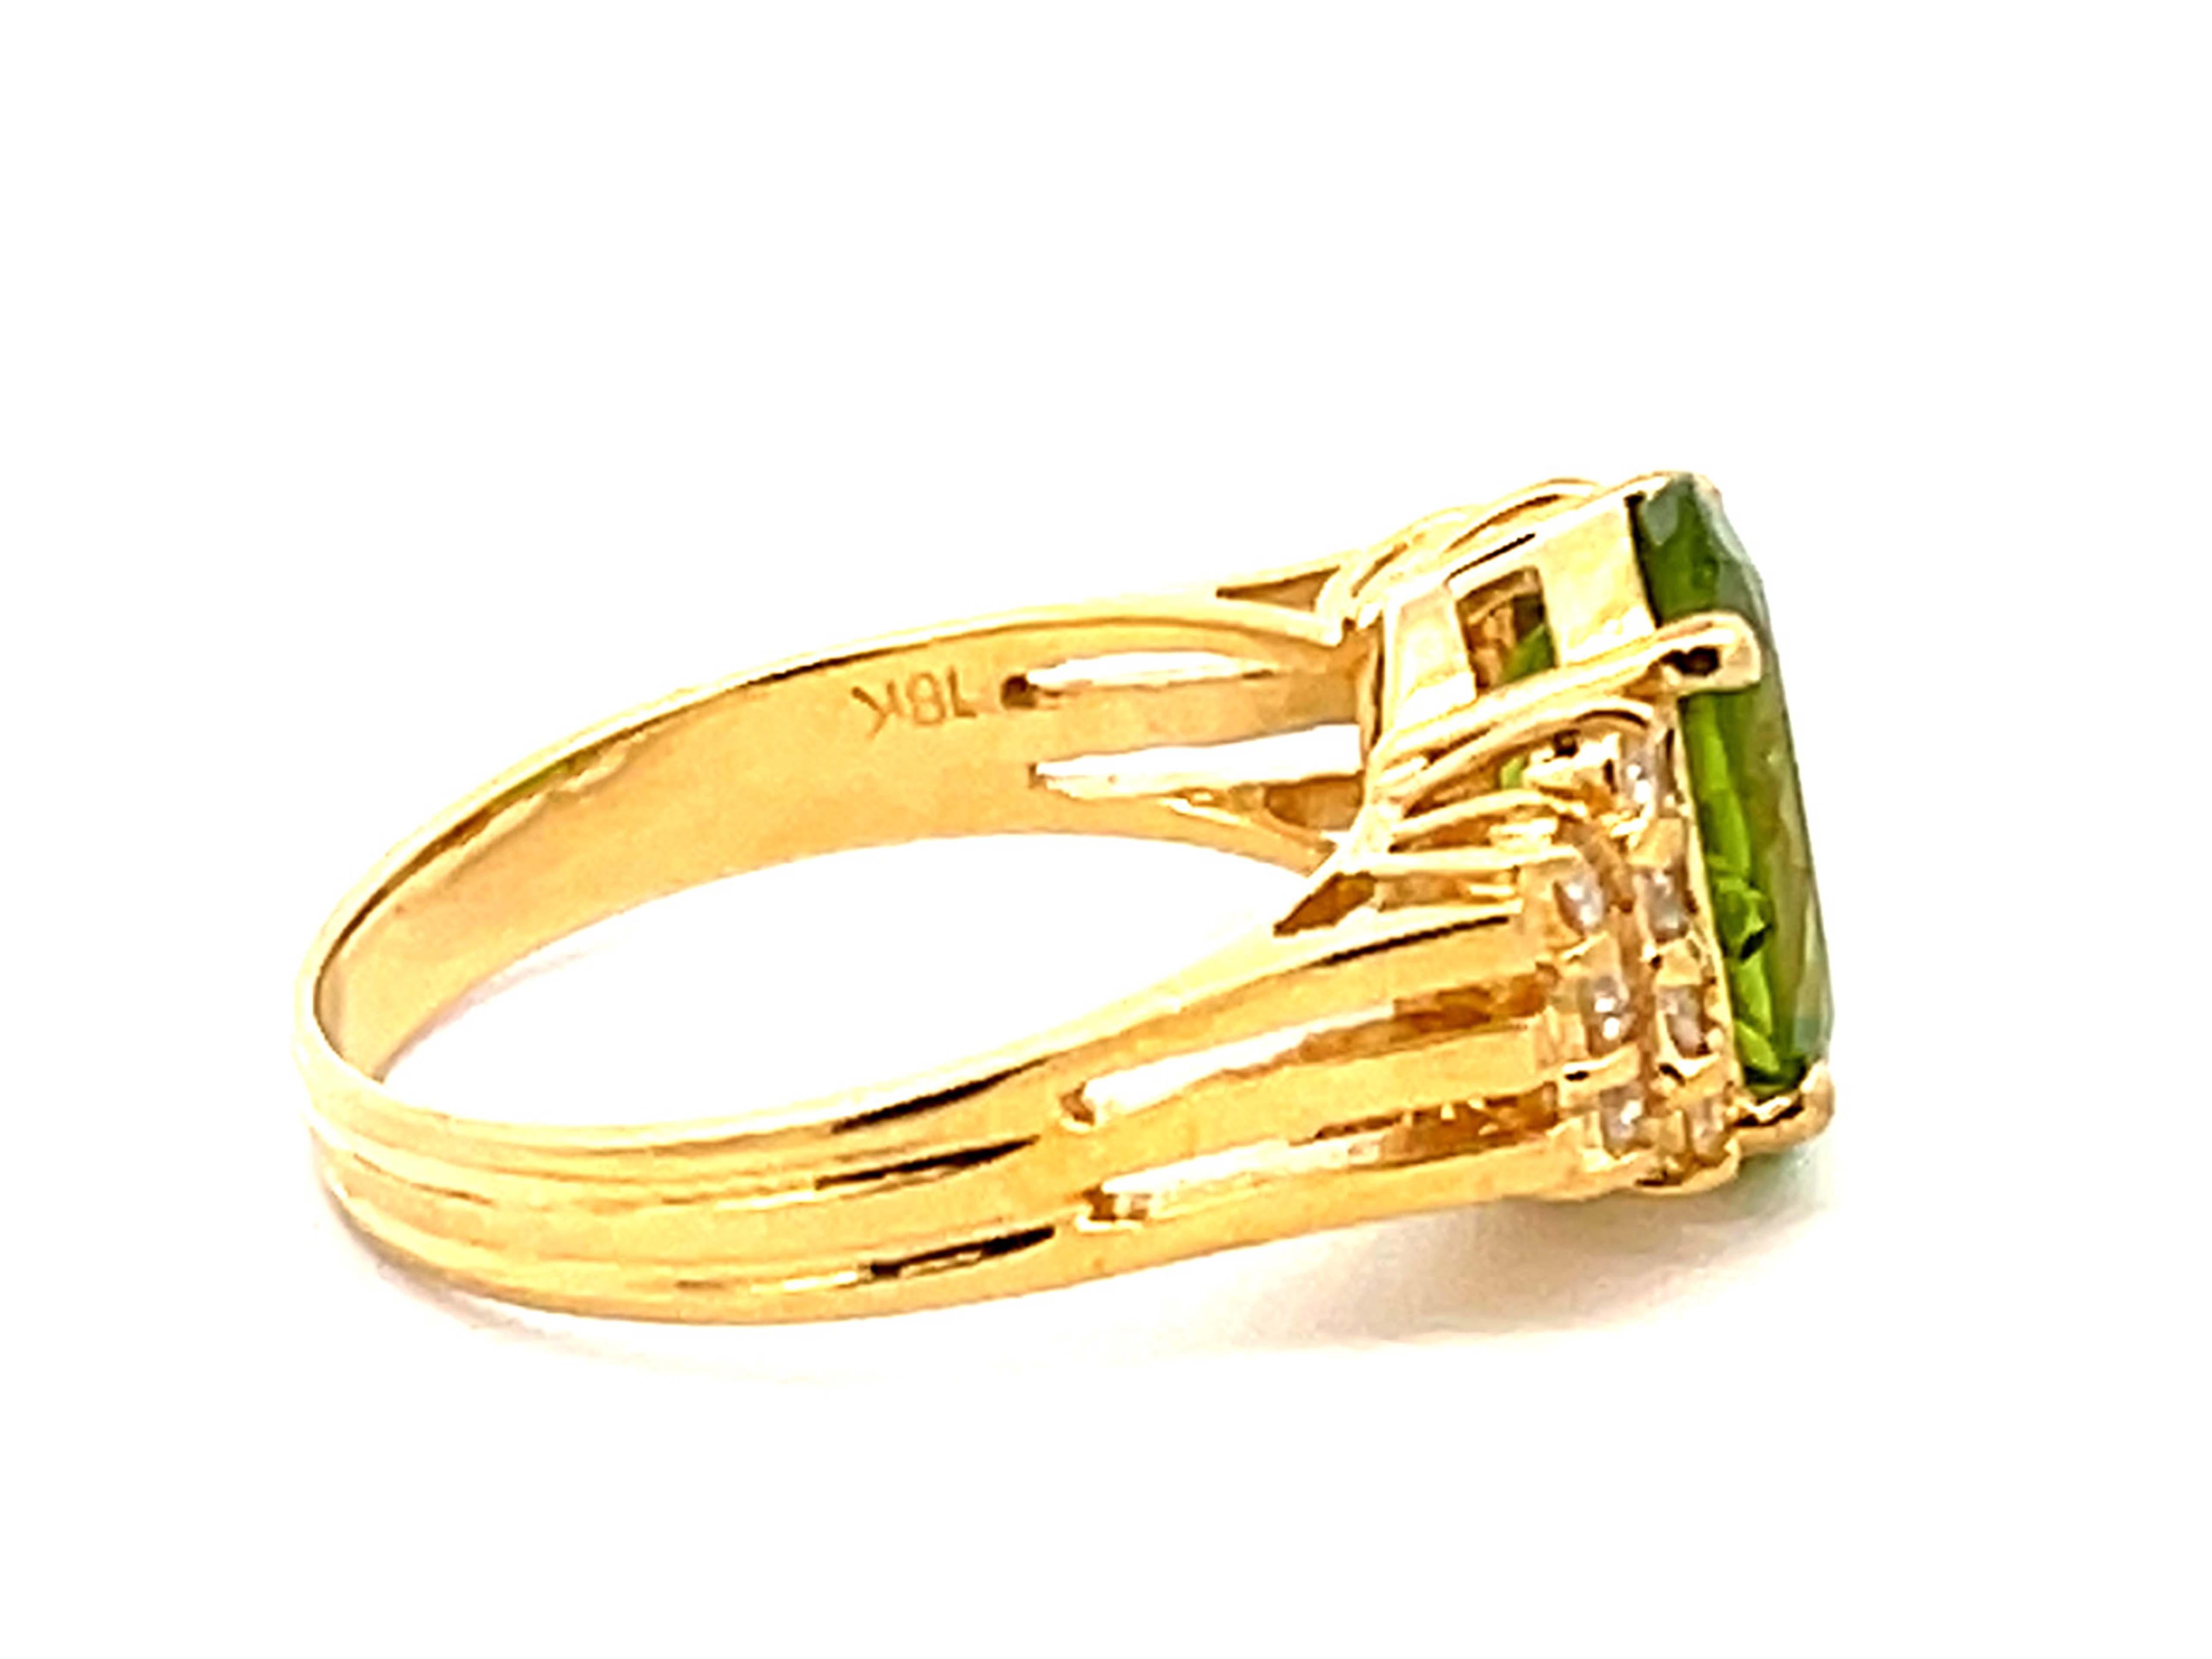 Vintage Peridot and Diamond Ring in 18k Yellow Gold In Excellent Condition For Sale In Honolulu, HI